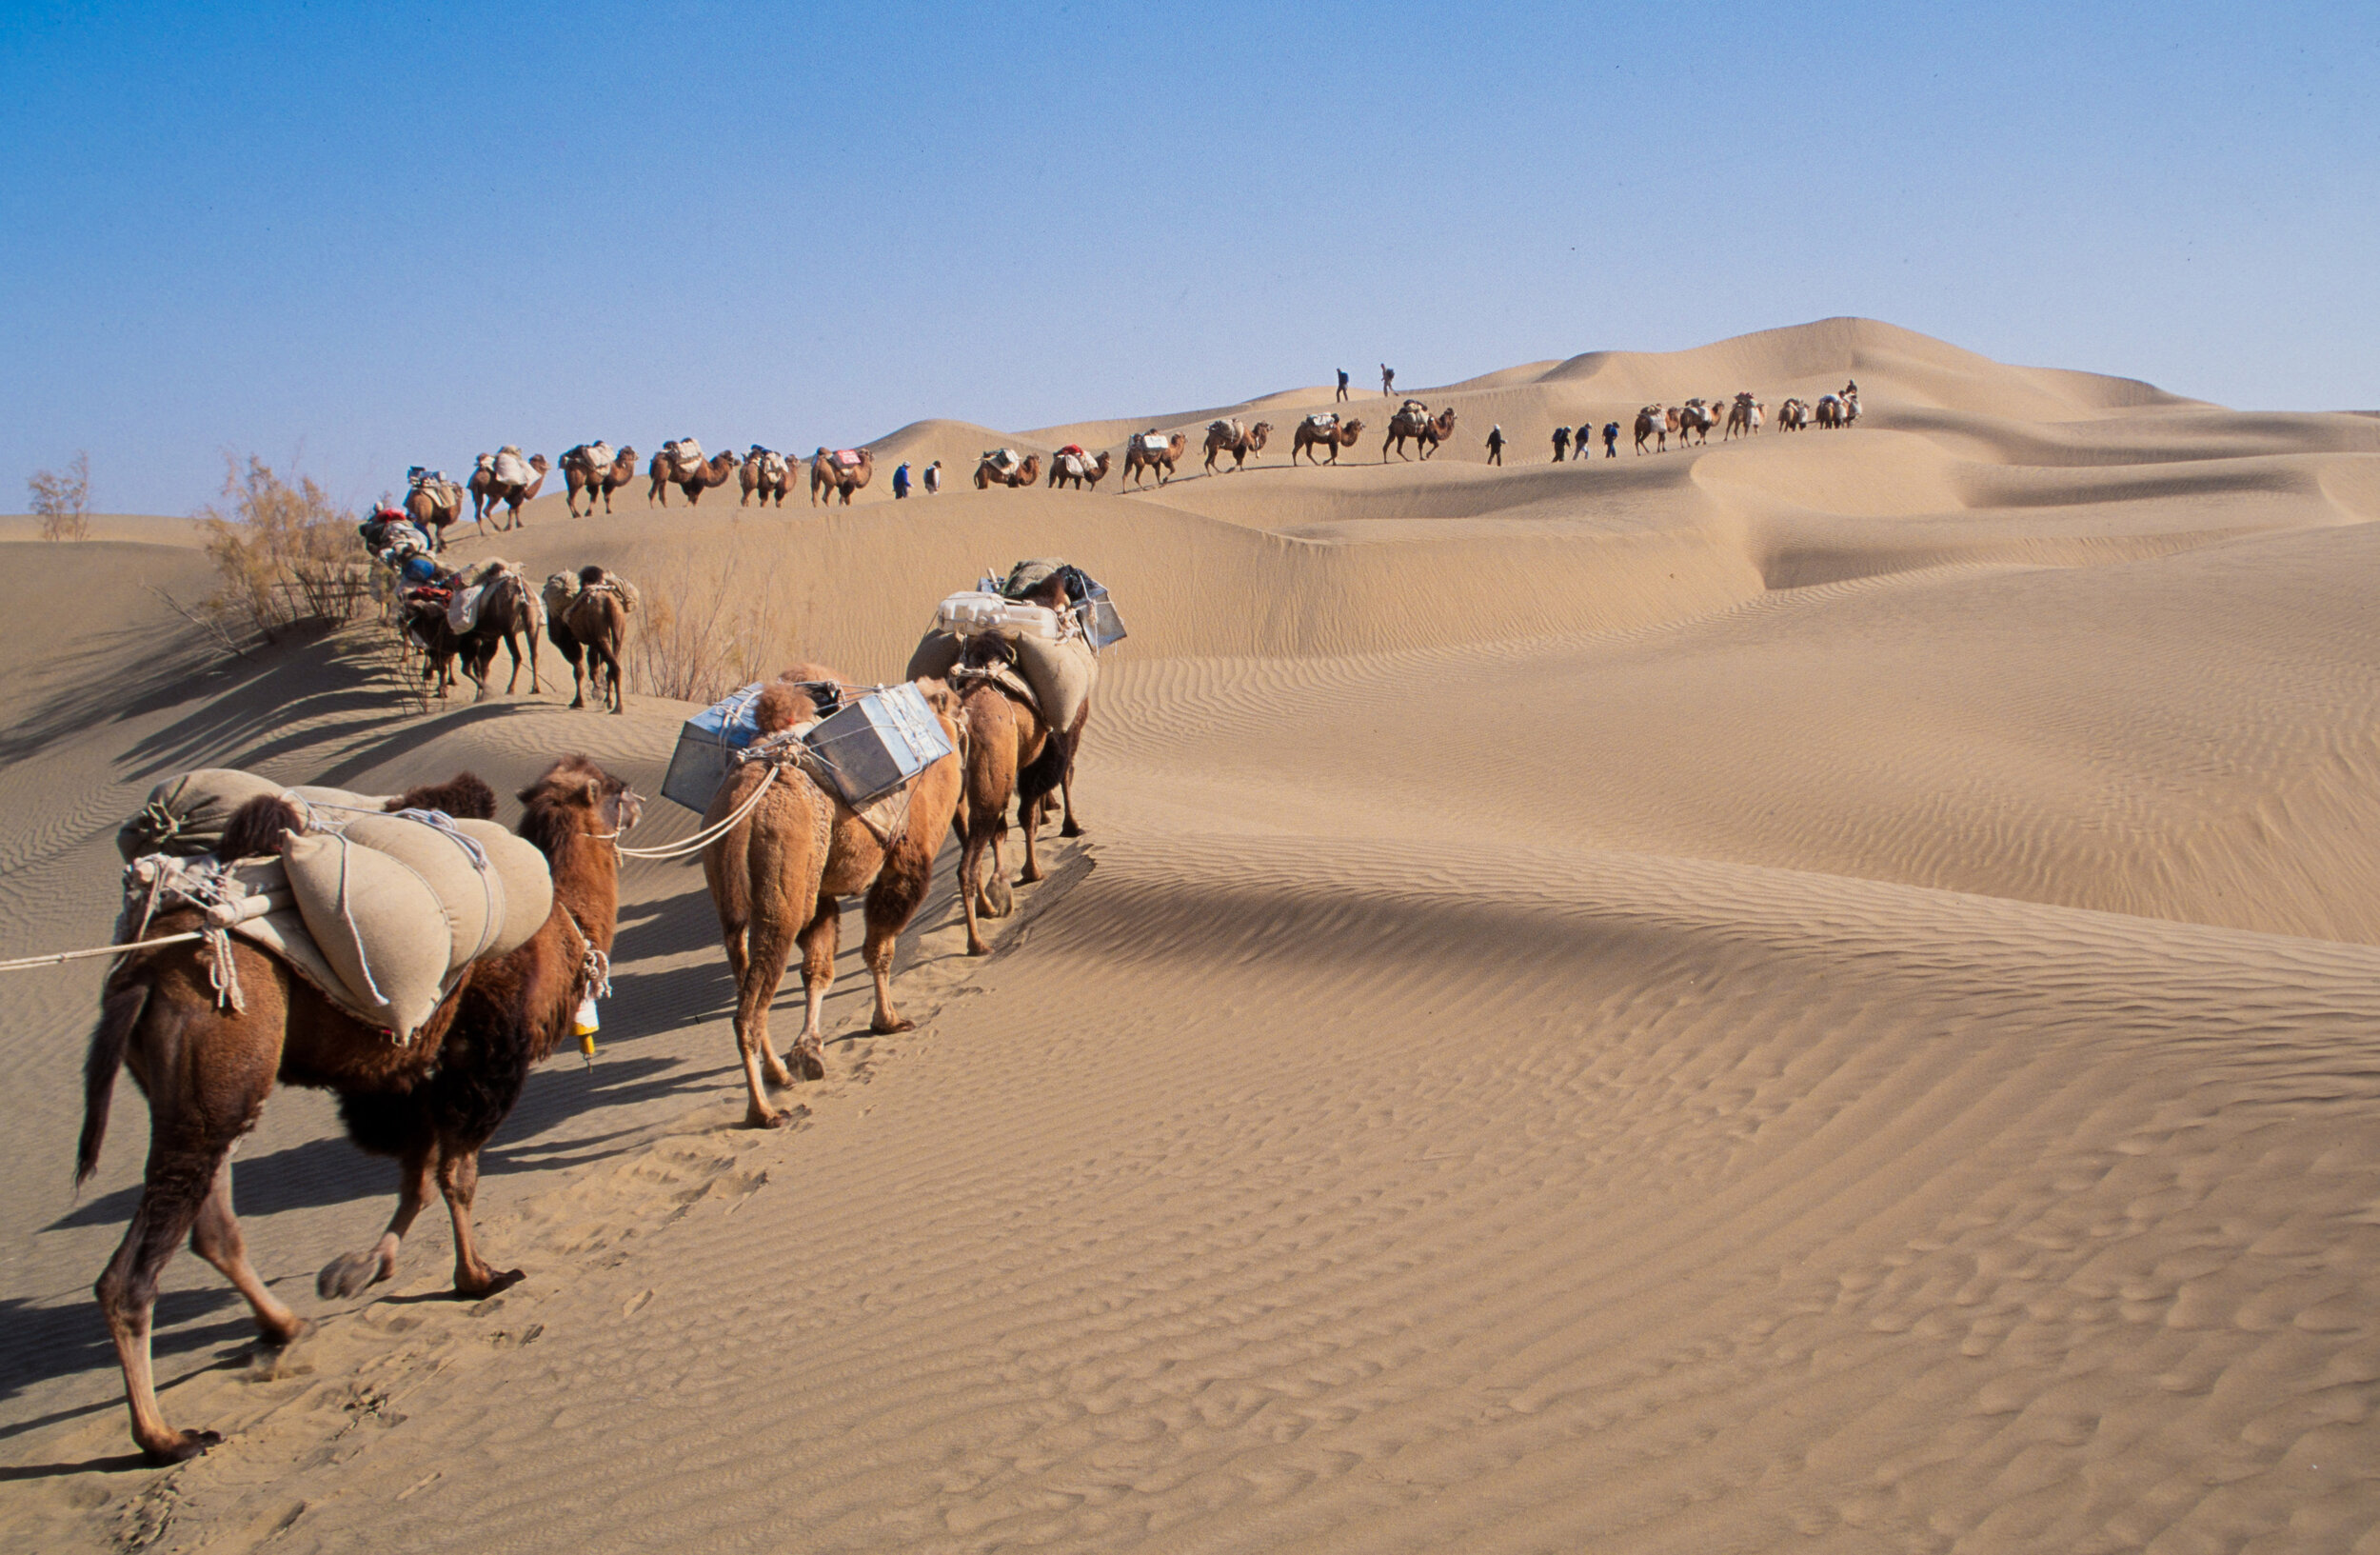  In the morning the caravan would start off together but as the day wore on groupings of around 7 camels and several team members would start spreading out over the route chosen by the days navigator.  